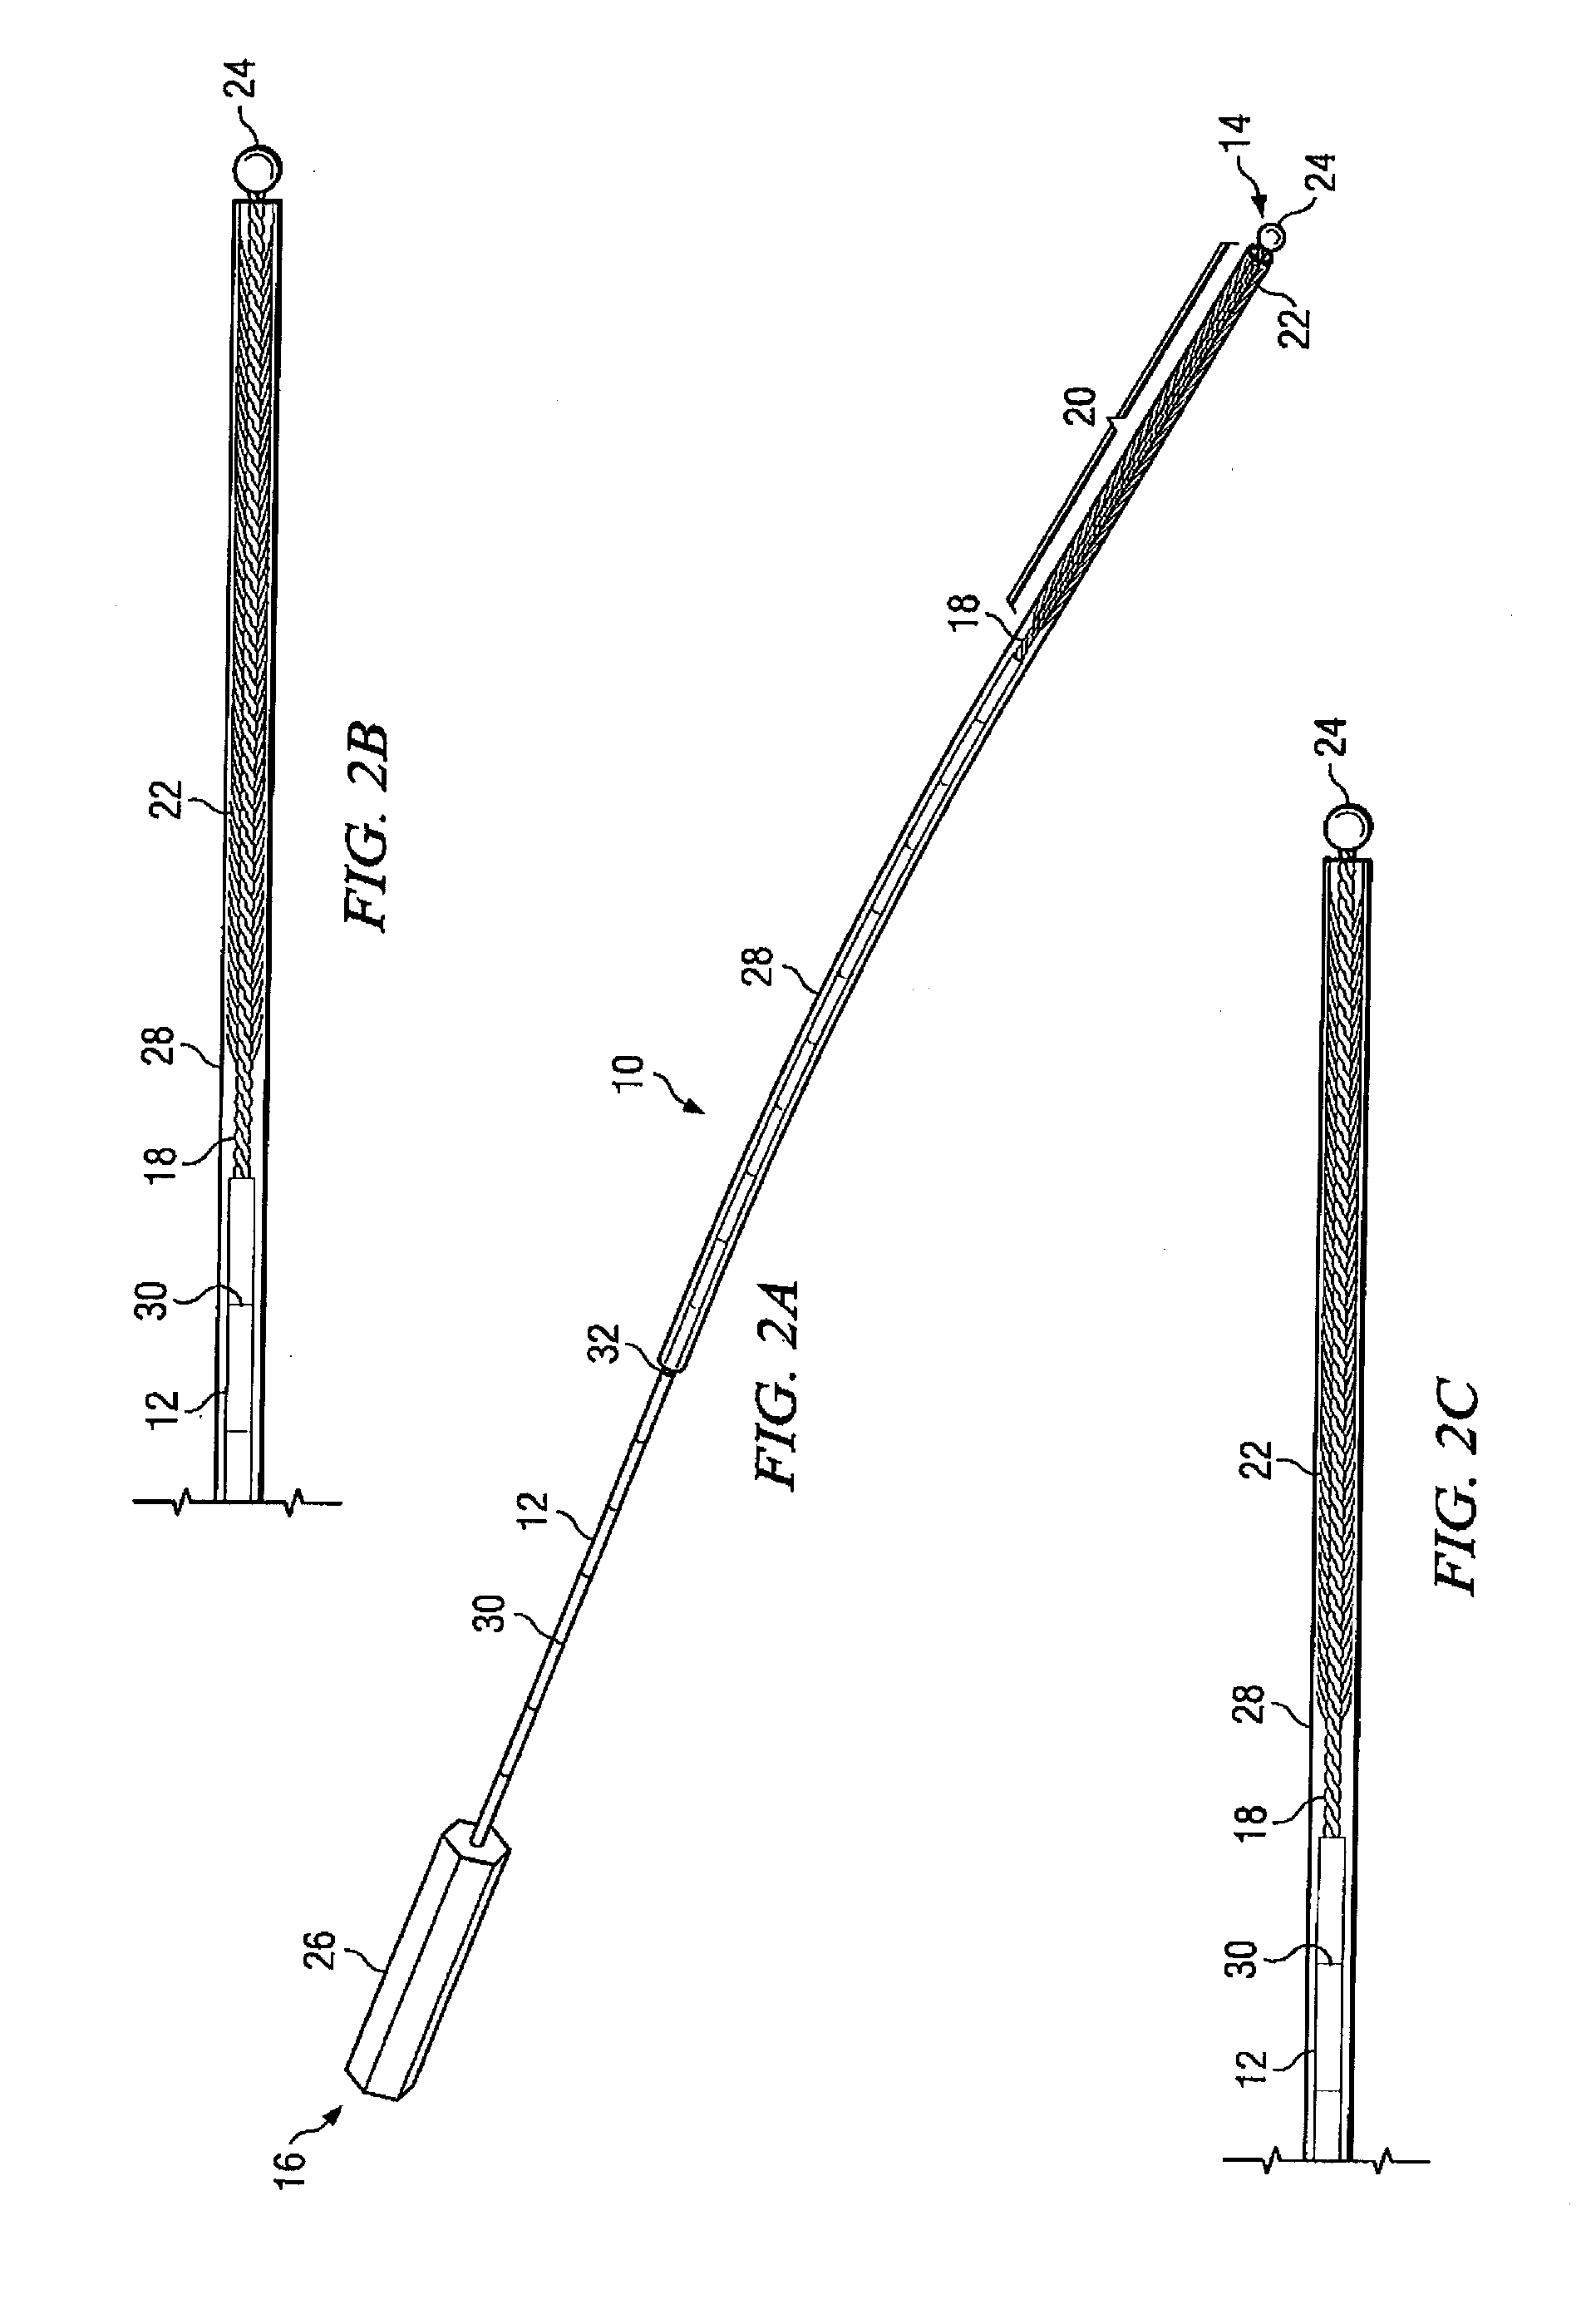 Device and method for collecting tissue samples